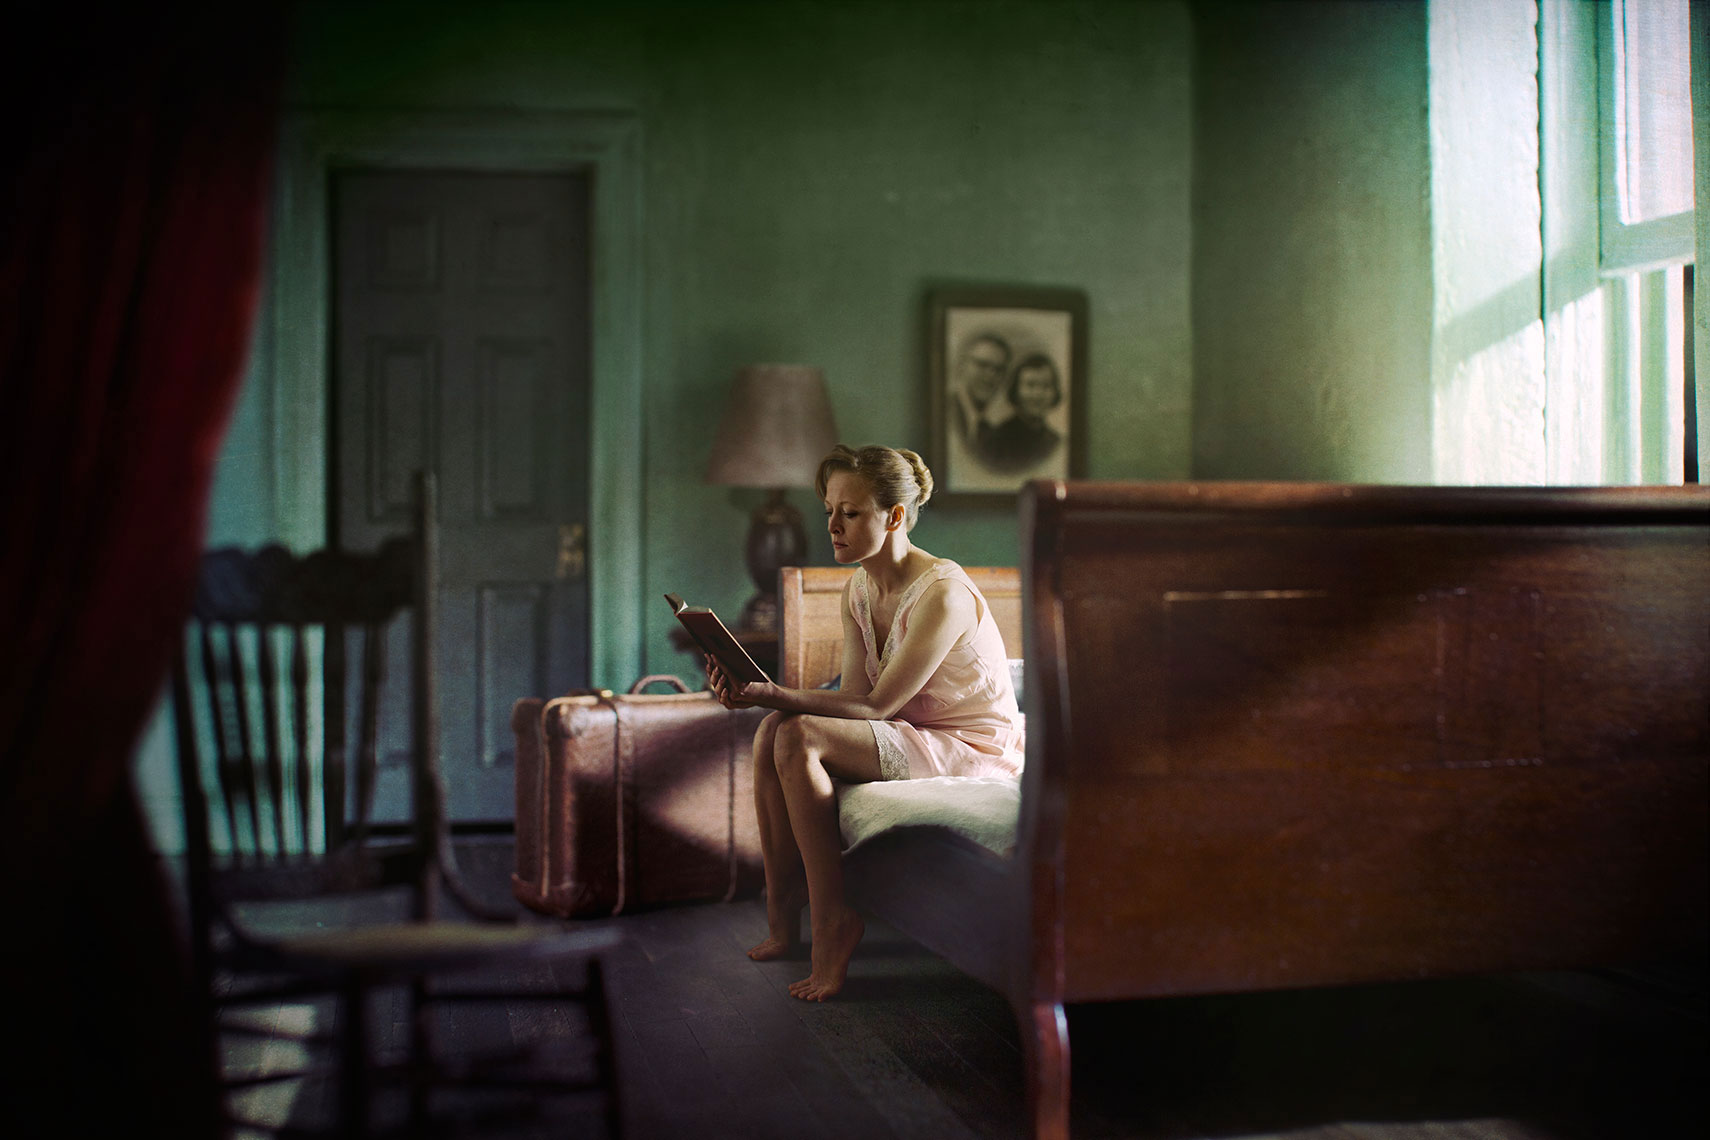 A photomontage homage to Edward Hopper, set in a 1940s’ New York apartment,  a dishwater-blonde woman wearing only a slip, sits on the edge of an unmade sleigh-bed reading a book by the bright sunlight from the open window, a suitcase standing upright on the floor next to her.